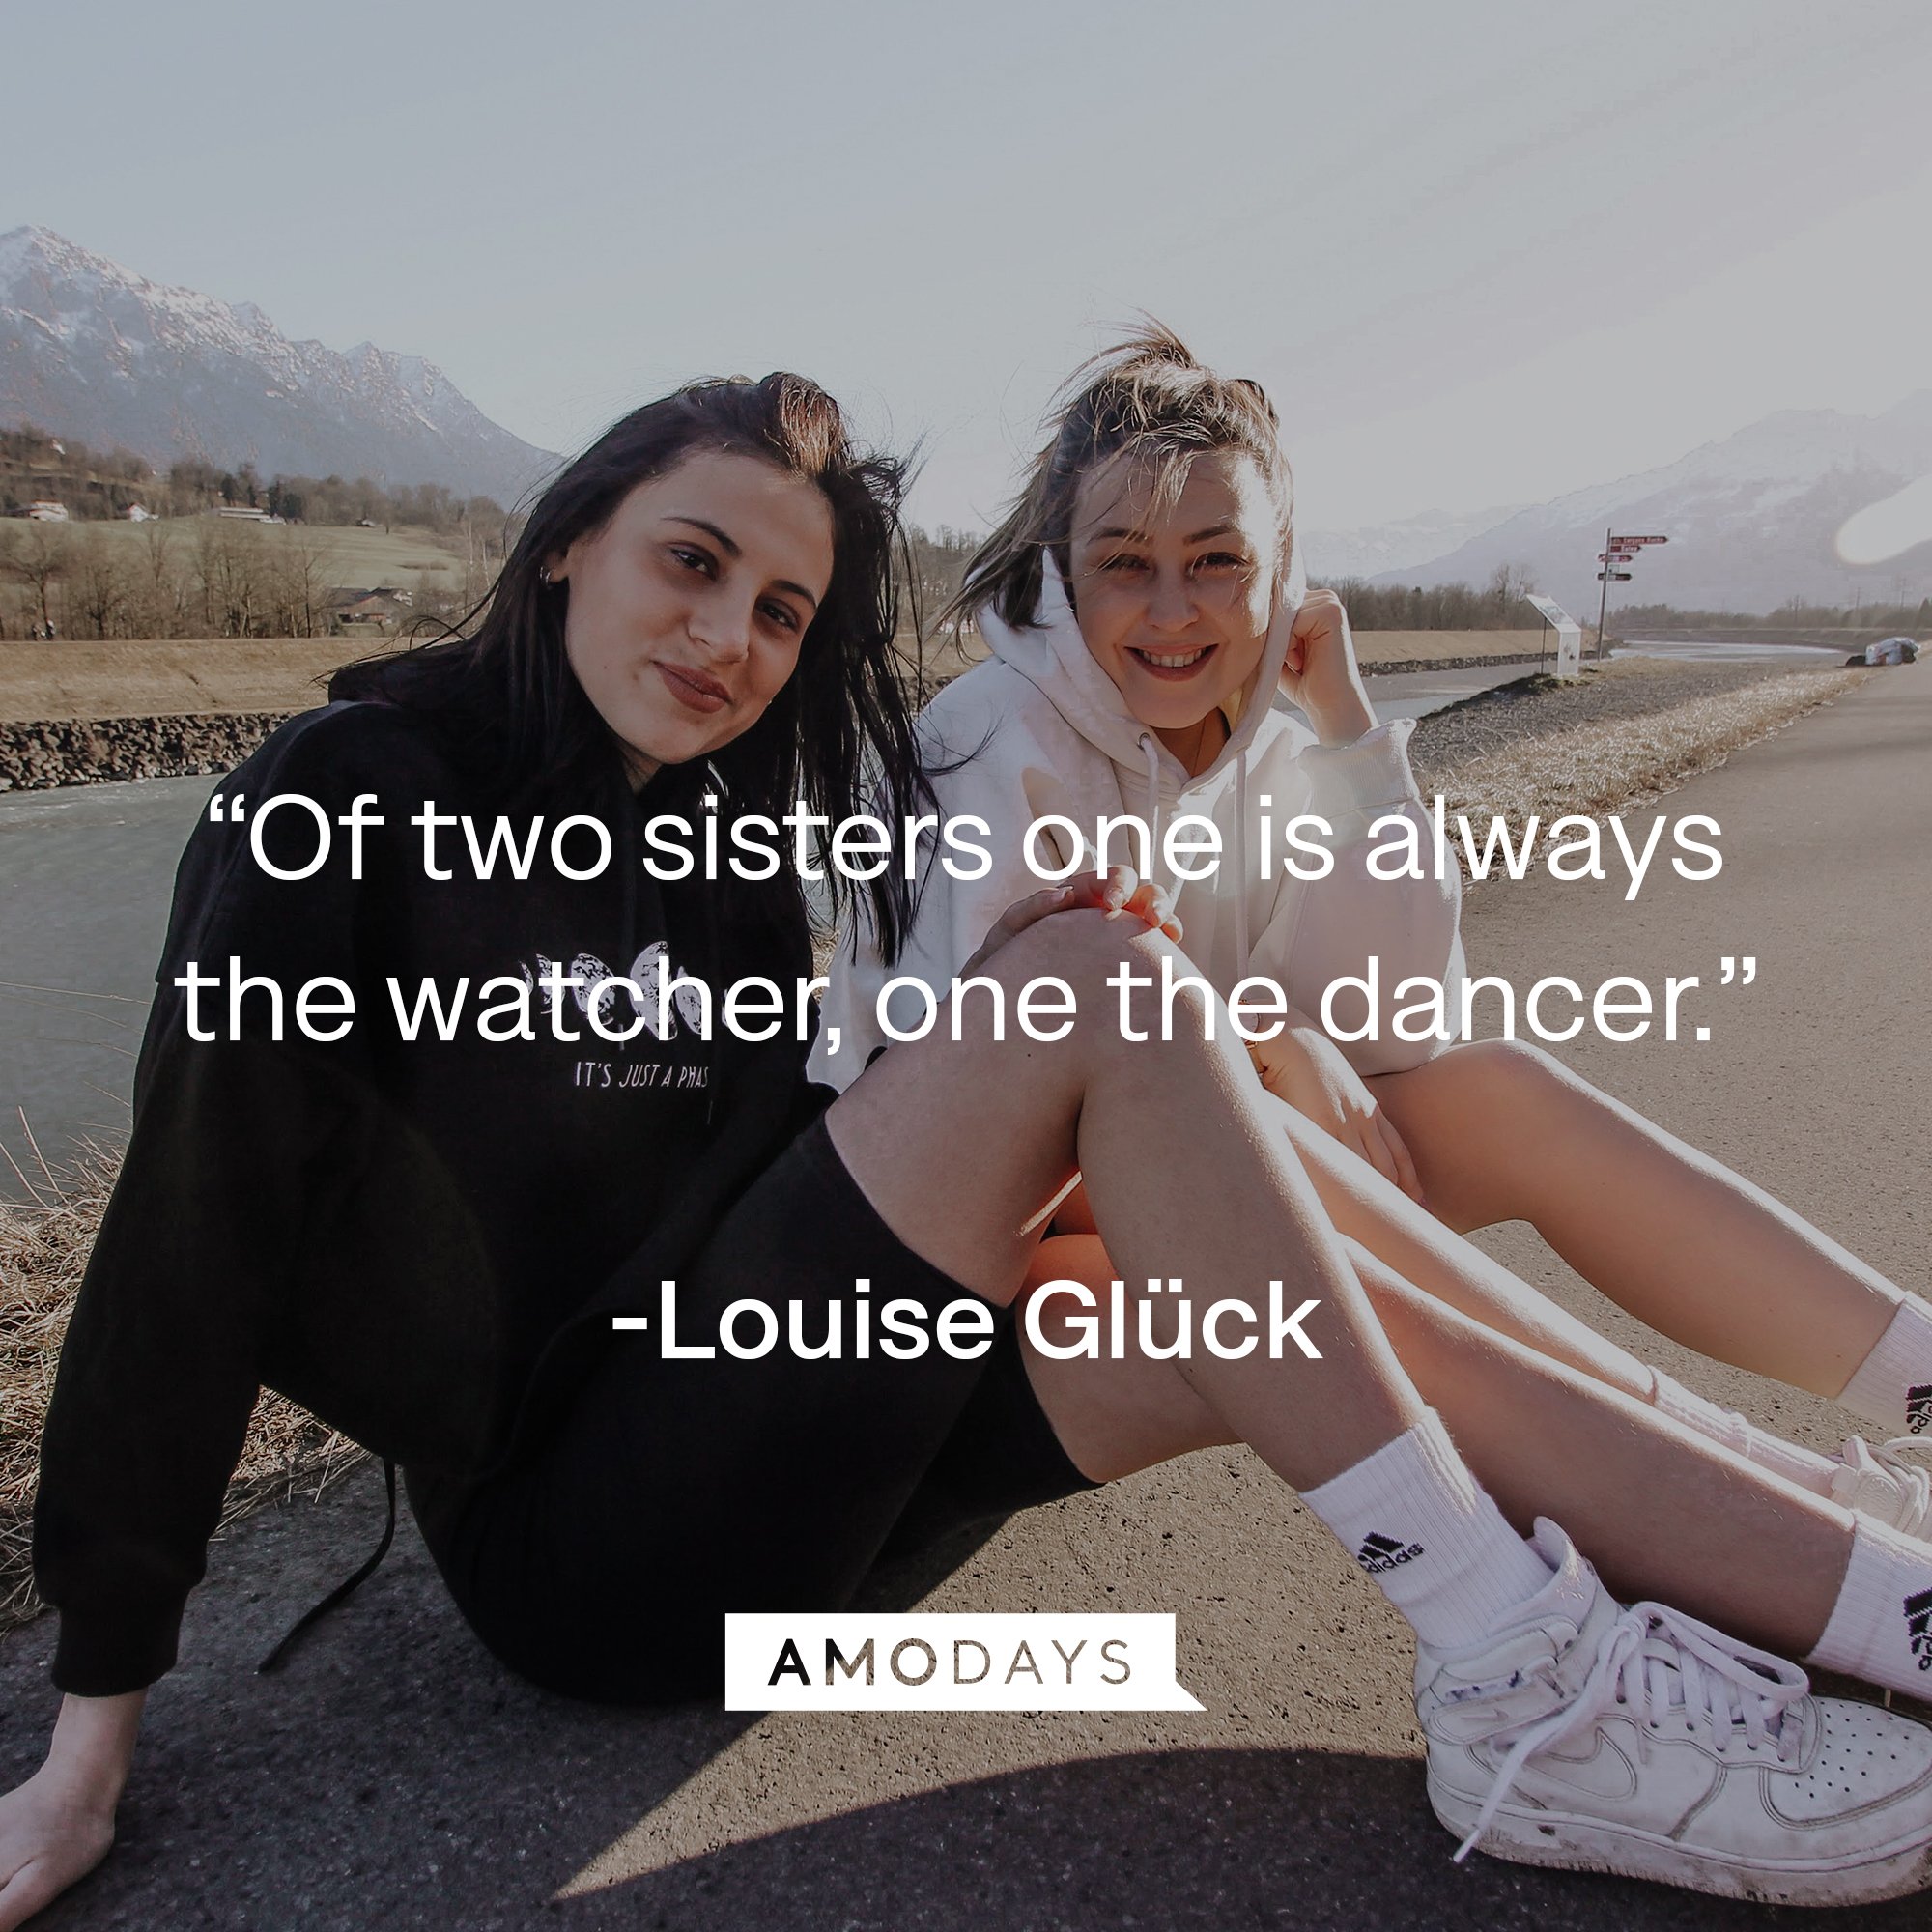 Louise Glück's quote: “Of two sisters one is always the watcher, one the dancer.” | Image: AmoDays